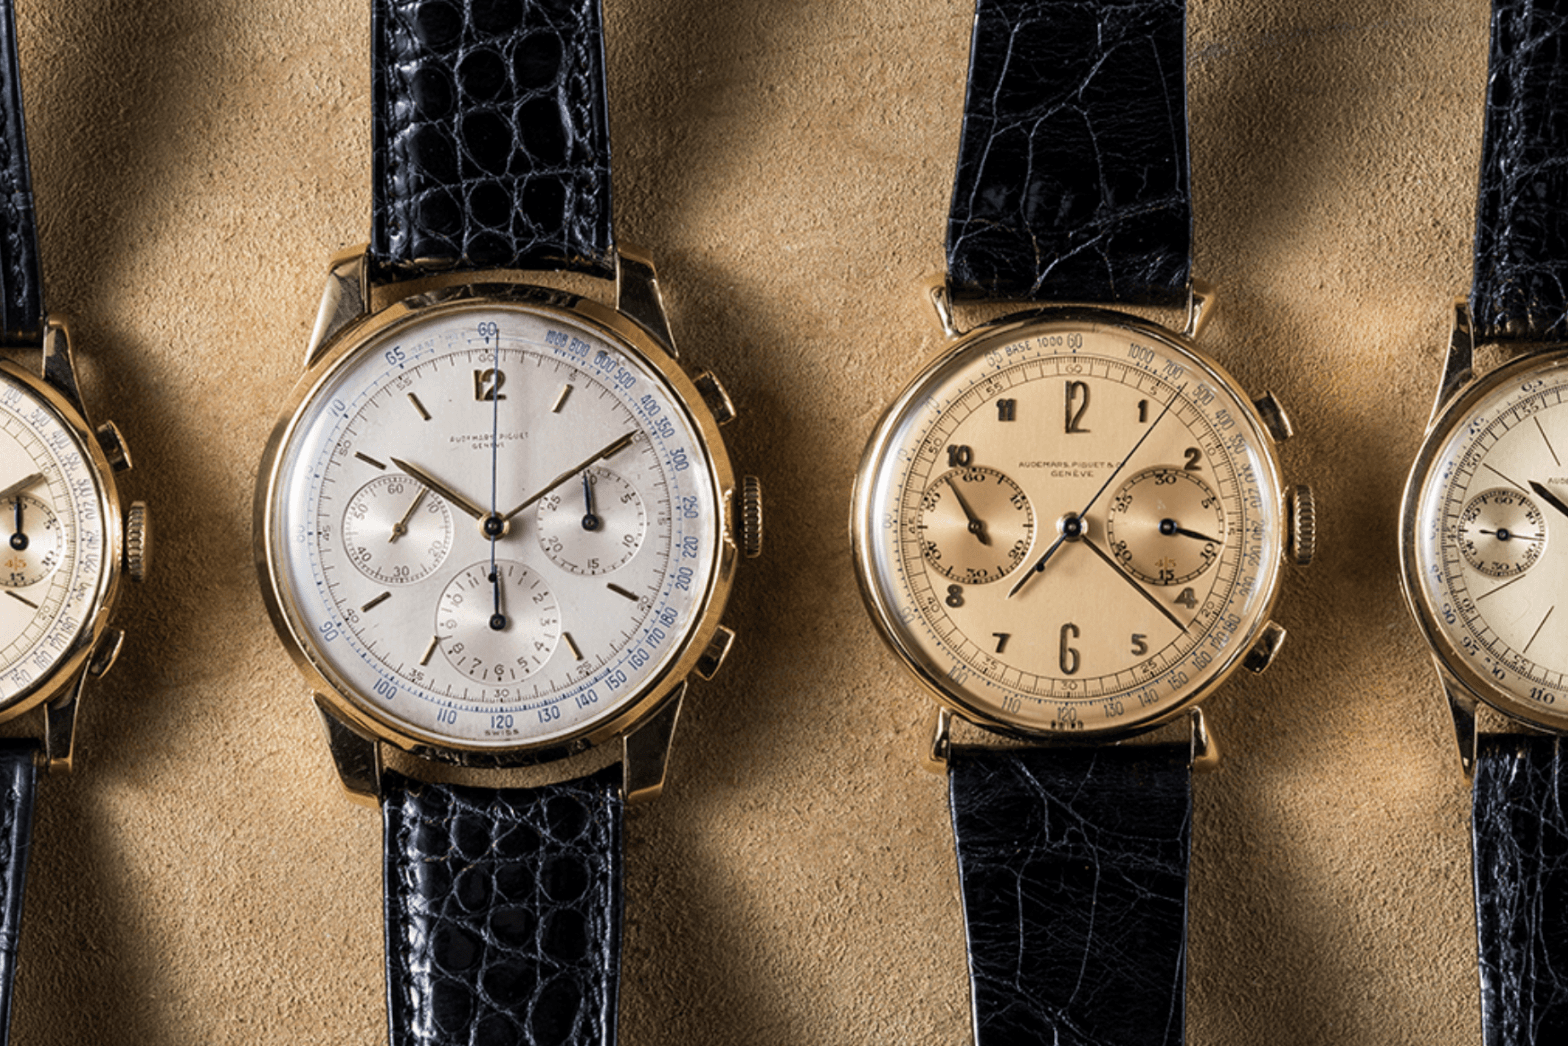 Four vintage chronographs of various designs including the model 5522 (second from the left),  the only known vintage AP chronograph in a 40mm case, image copyright Bexsonn